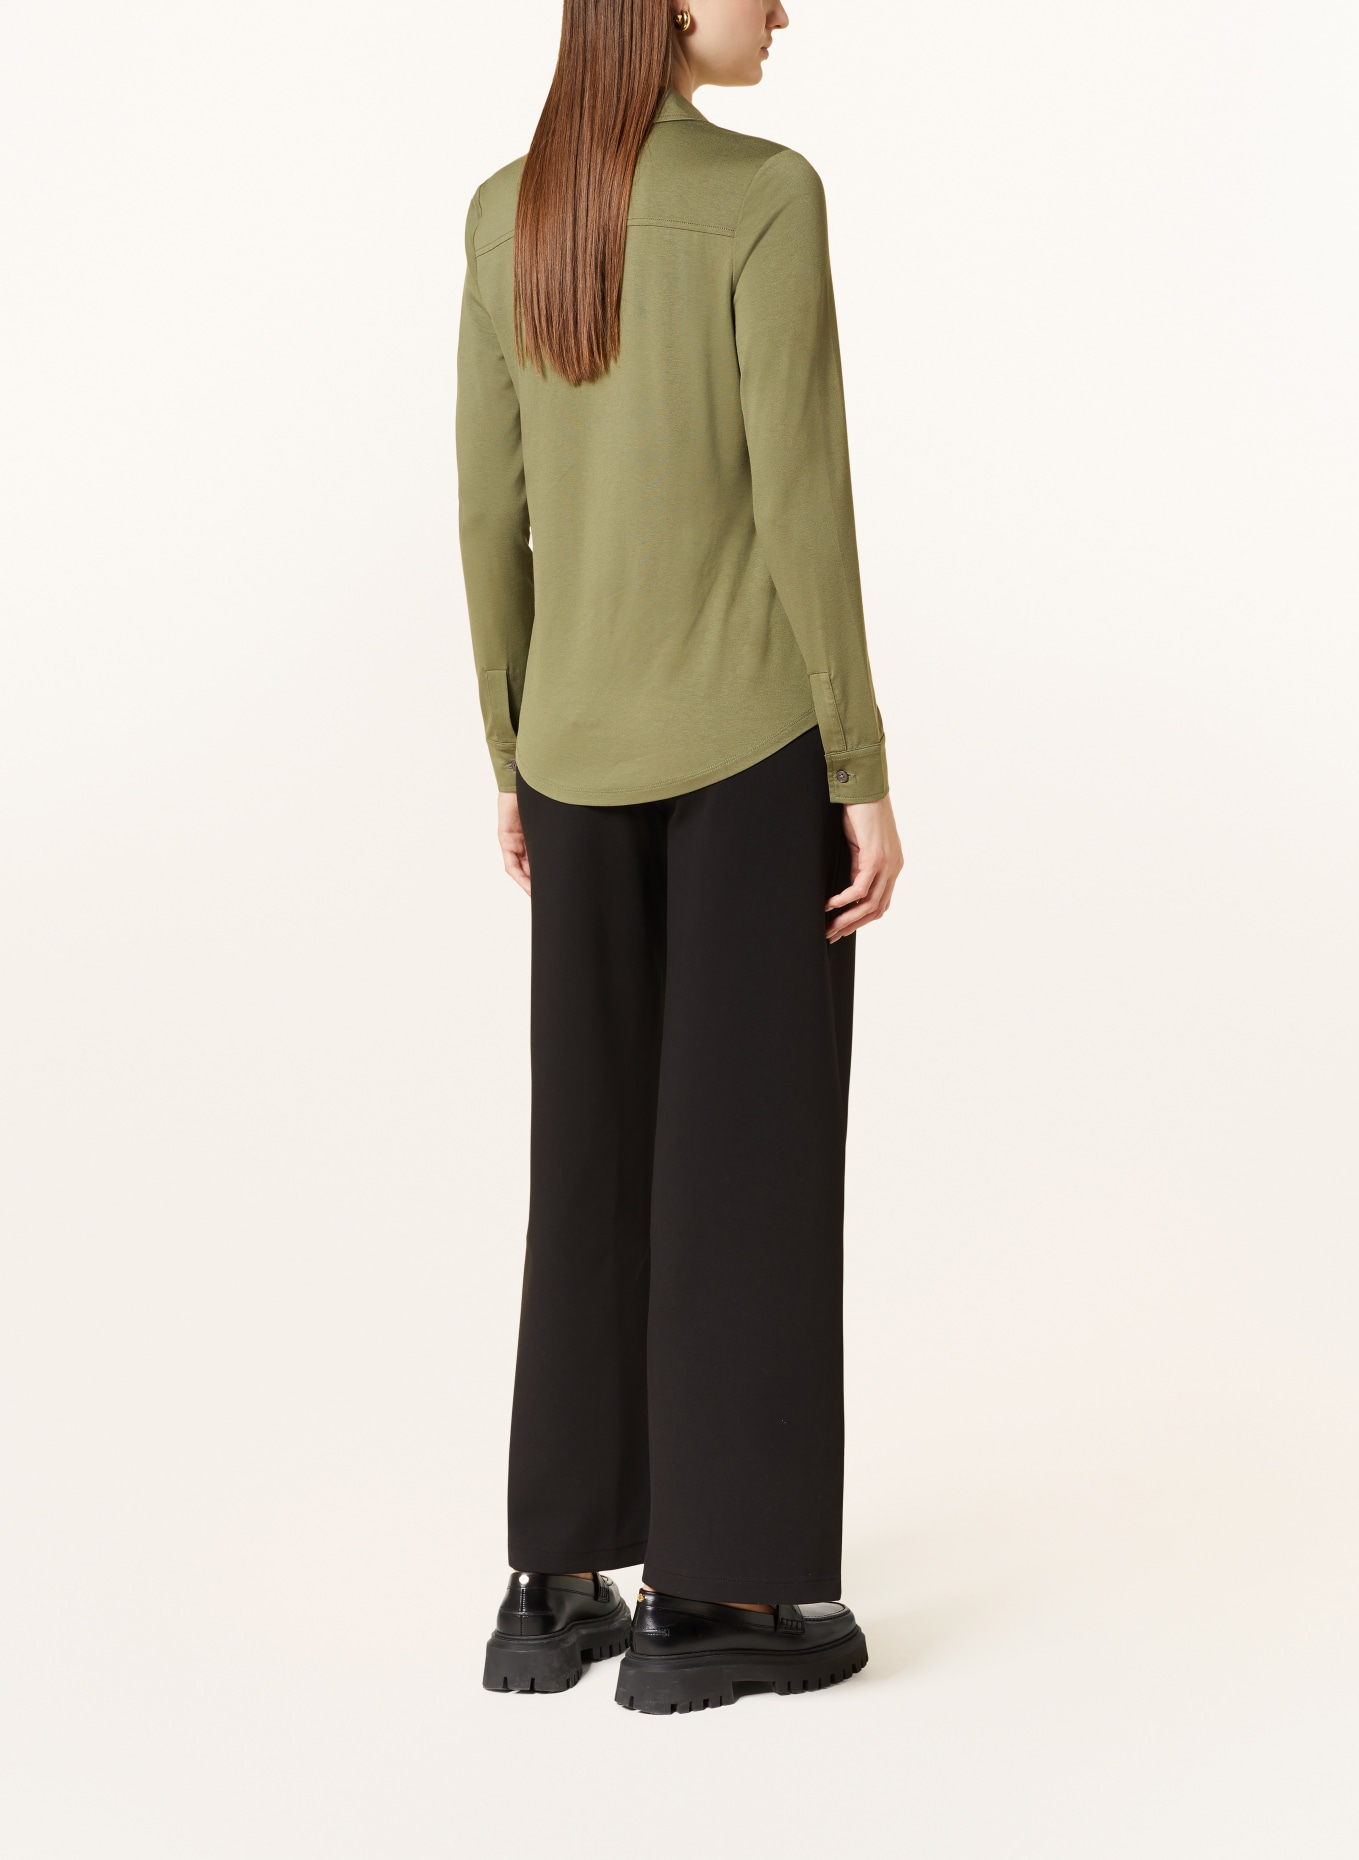 Marc O'Polo Shirt blouse made of jersey, Color: OLIVE (Image 3)